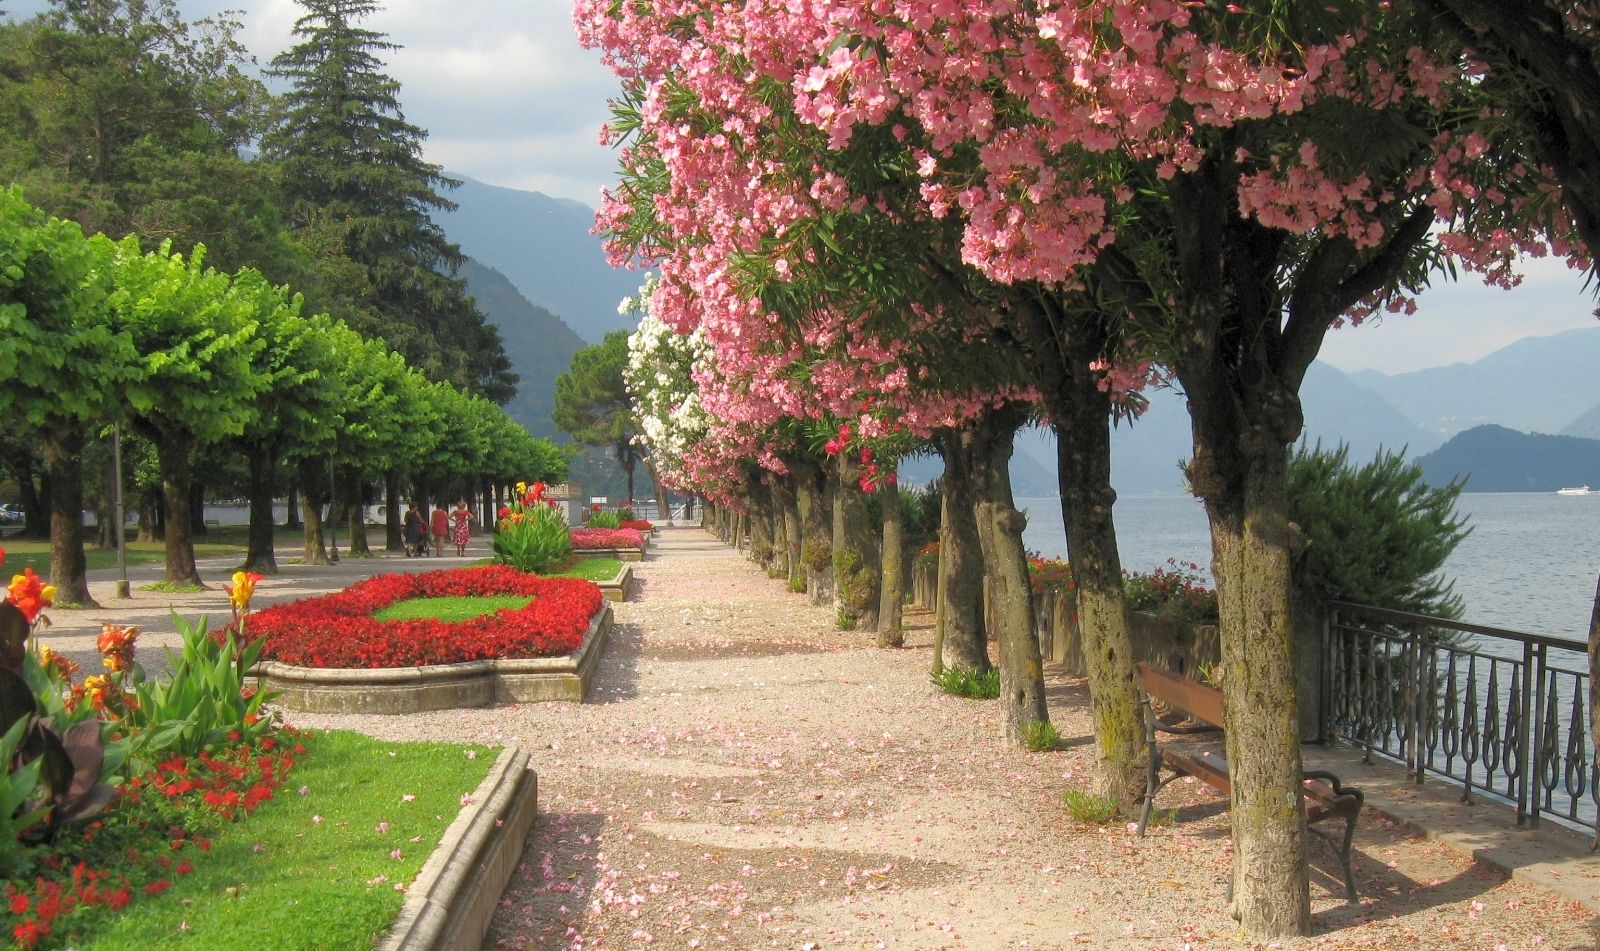 springtime, park, flowers, mountains, lake, beautiful, grass, Italy, trees, blossom wallpaper